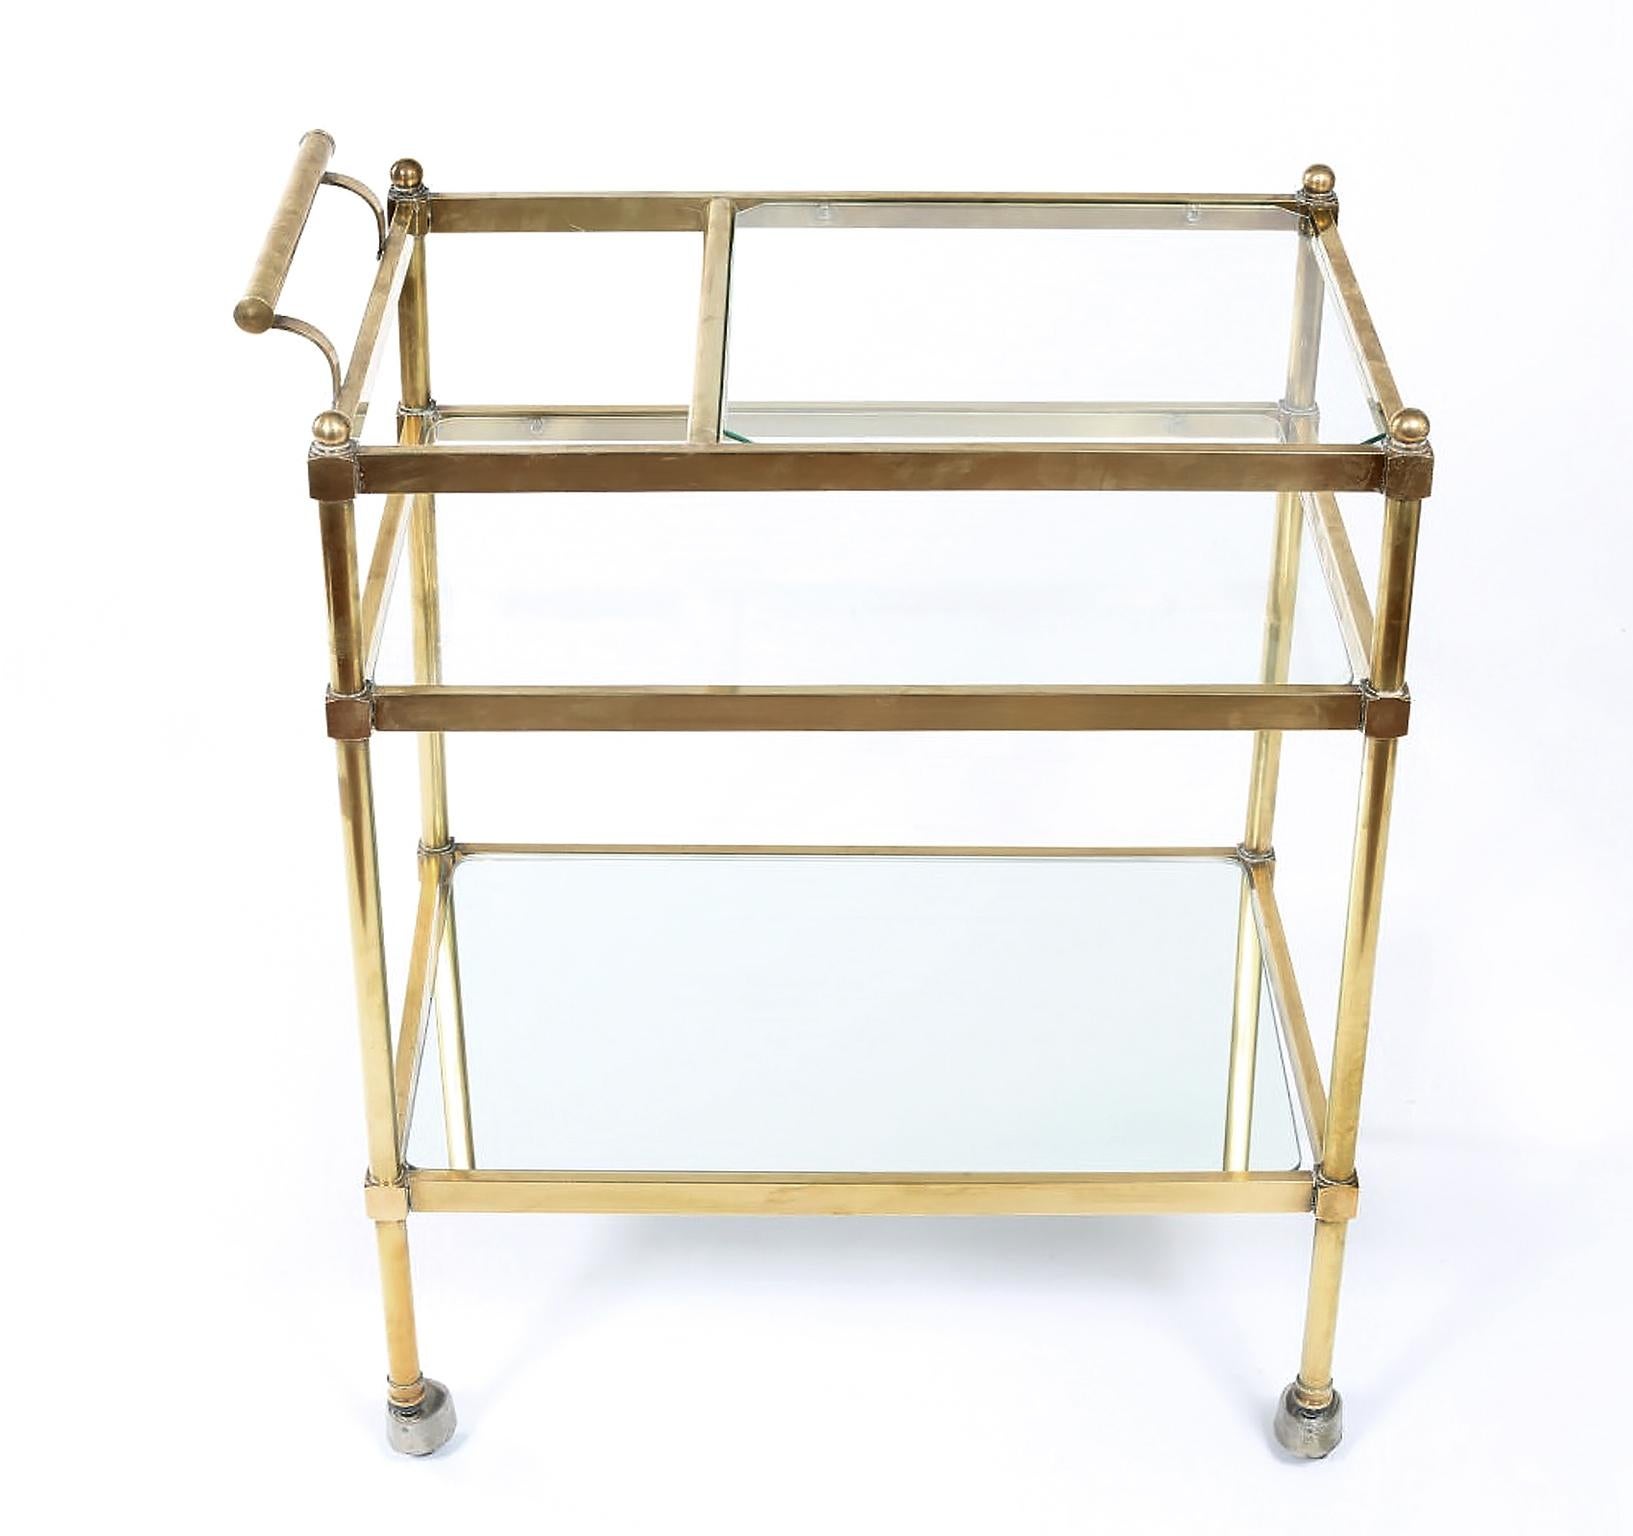 Stunning Italian three tiered brass/glass/mirror bar cart with space for bottles & side handle. The top two shelves are glass with the exception of the bottom shelve which is mirror shelve . The cart is in very good vintage condition with wear